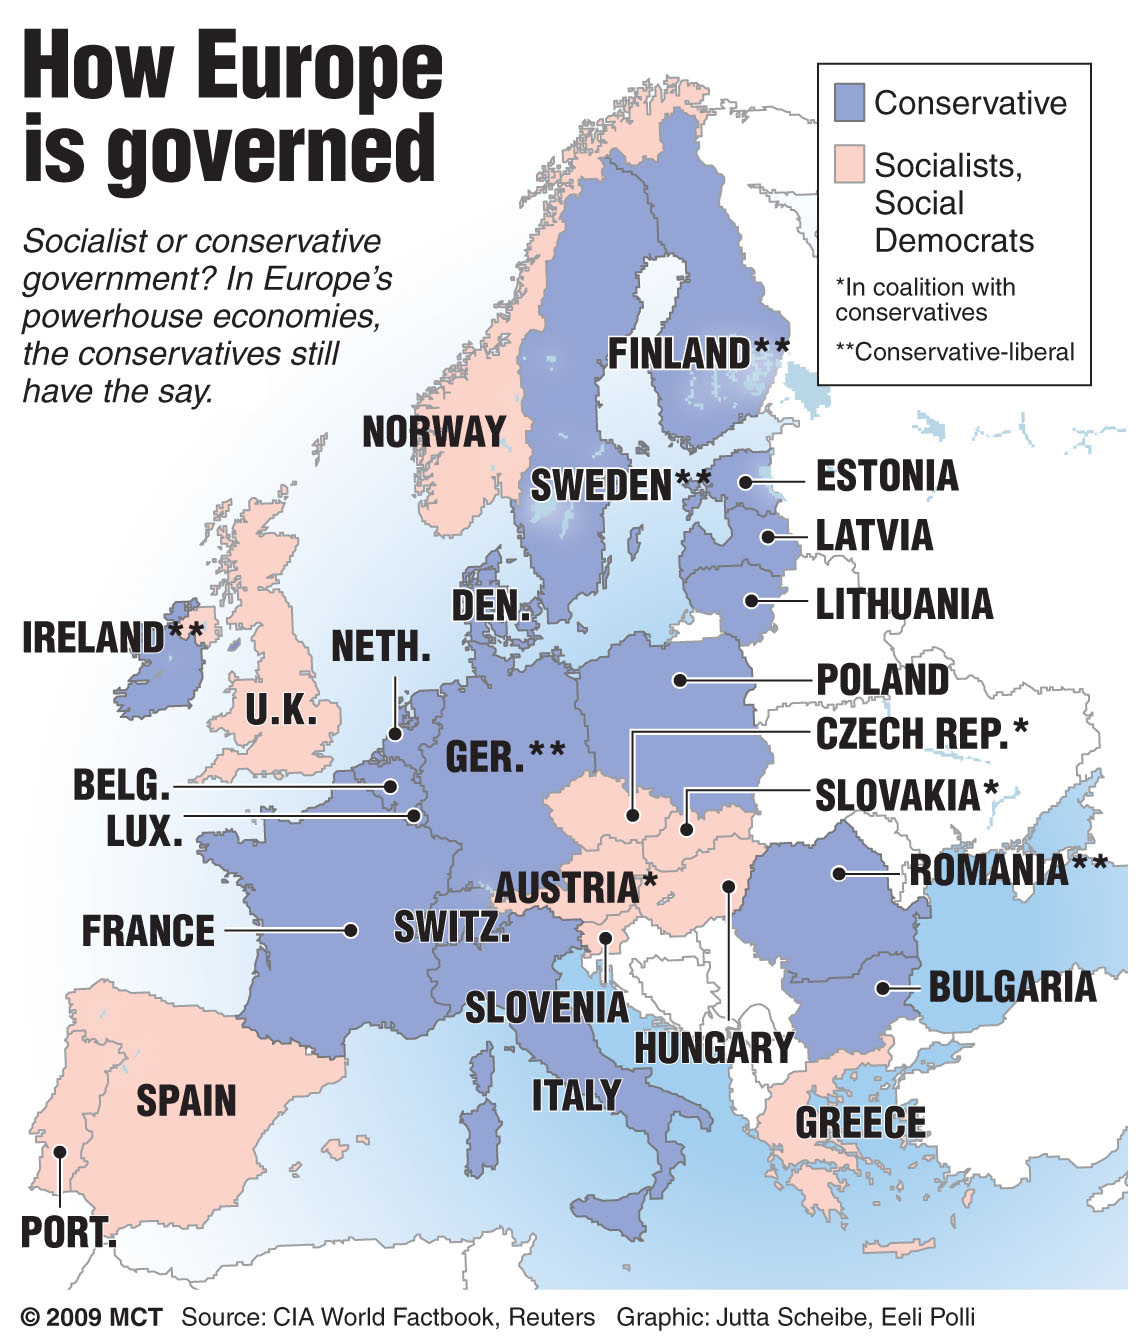 How Europe is governed Washington University Political Review